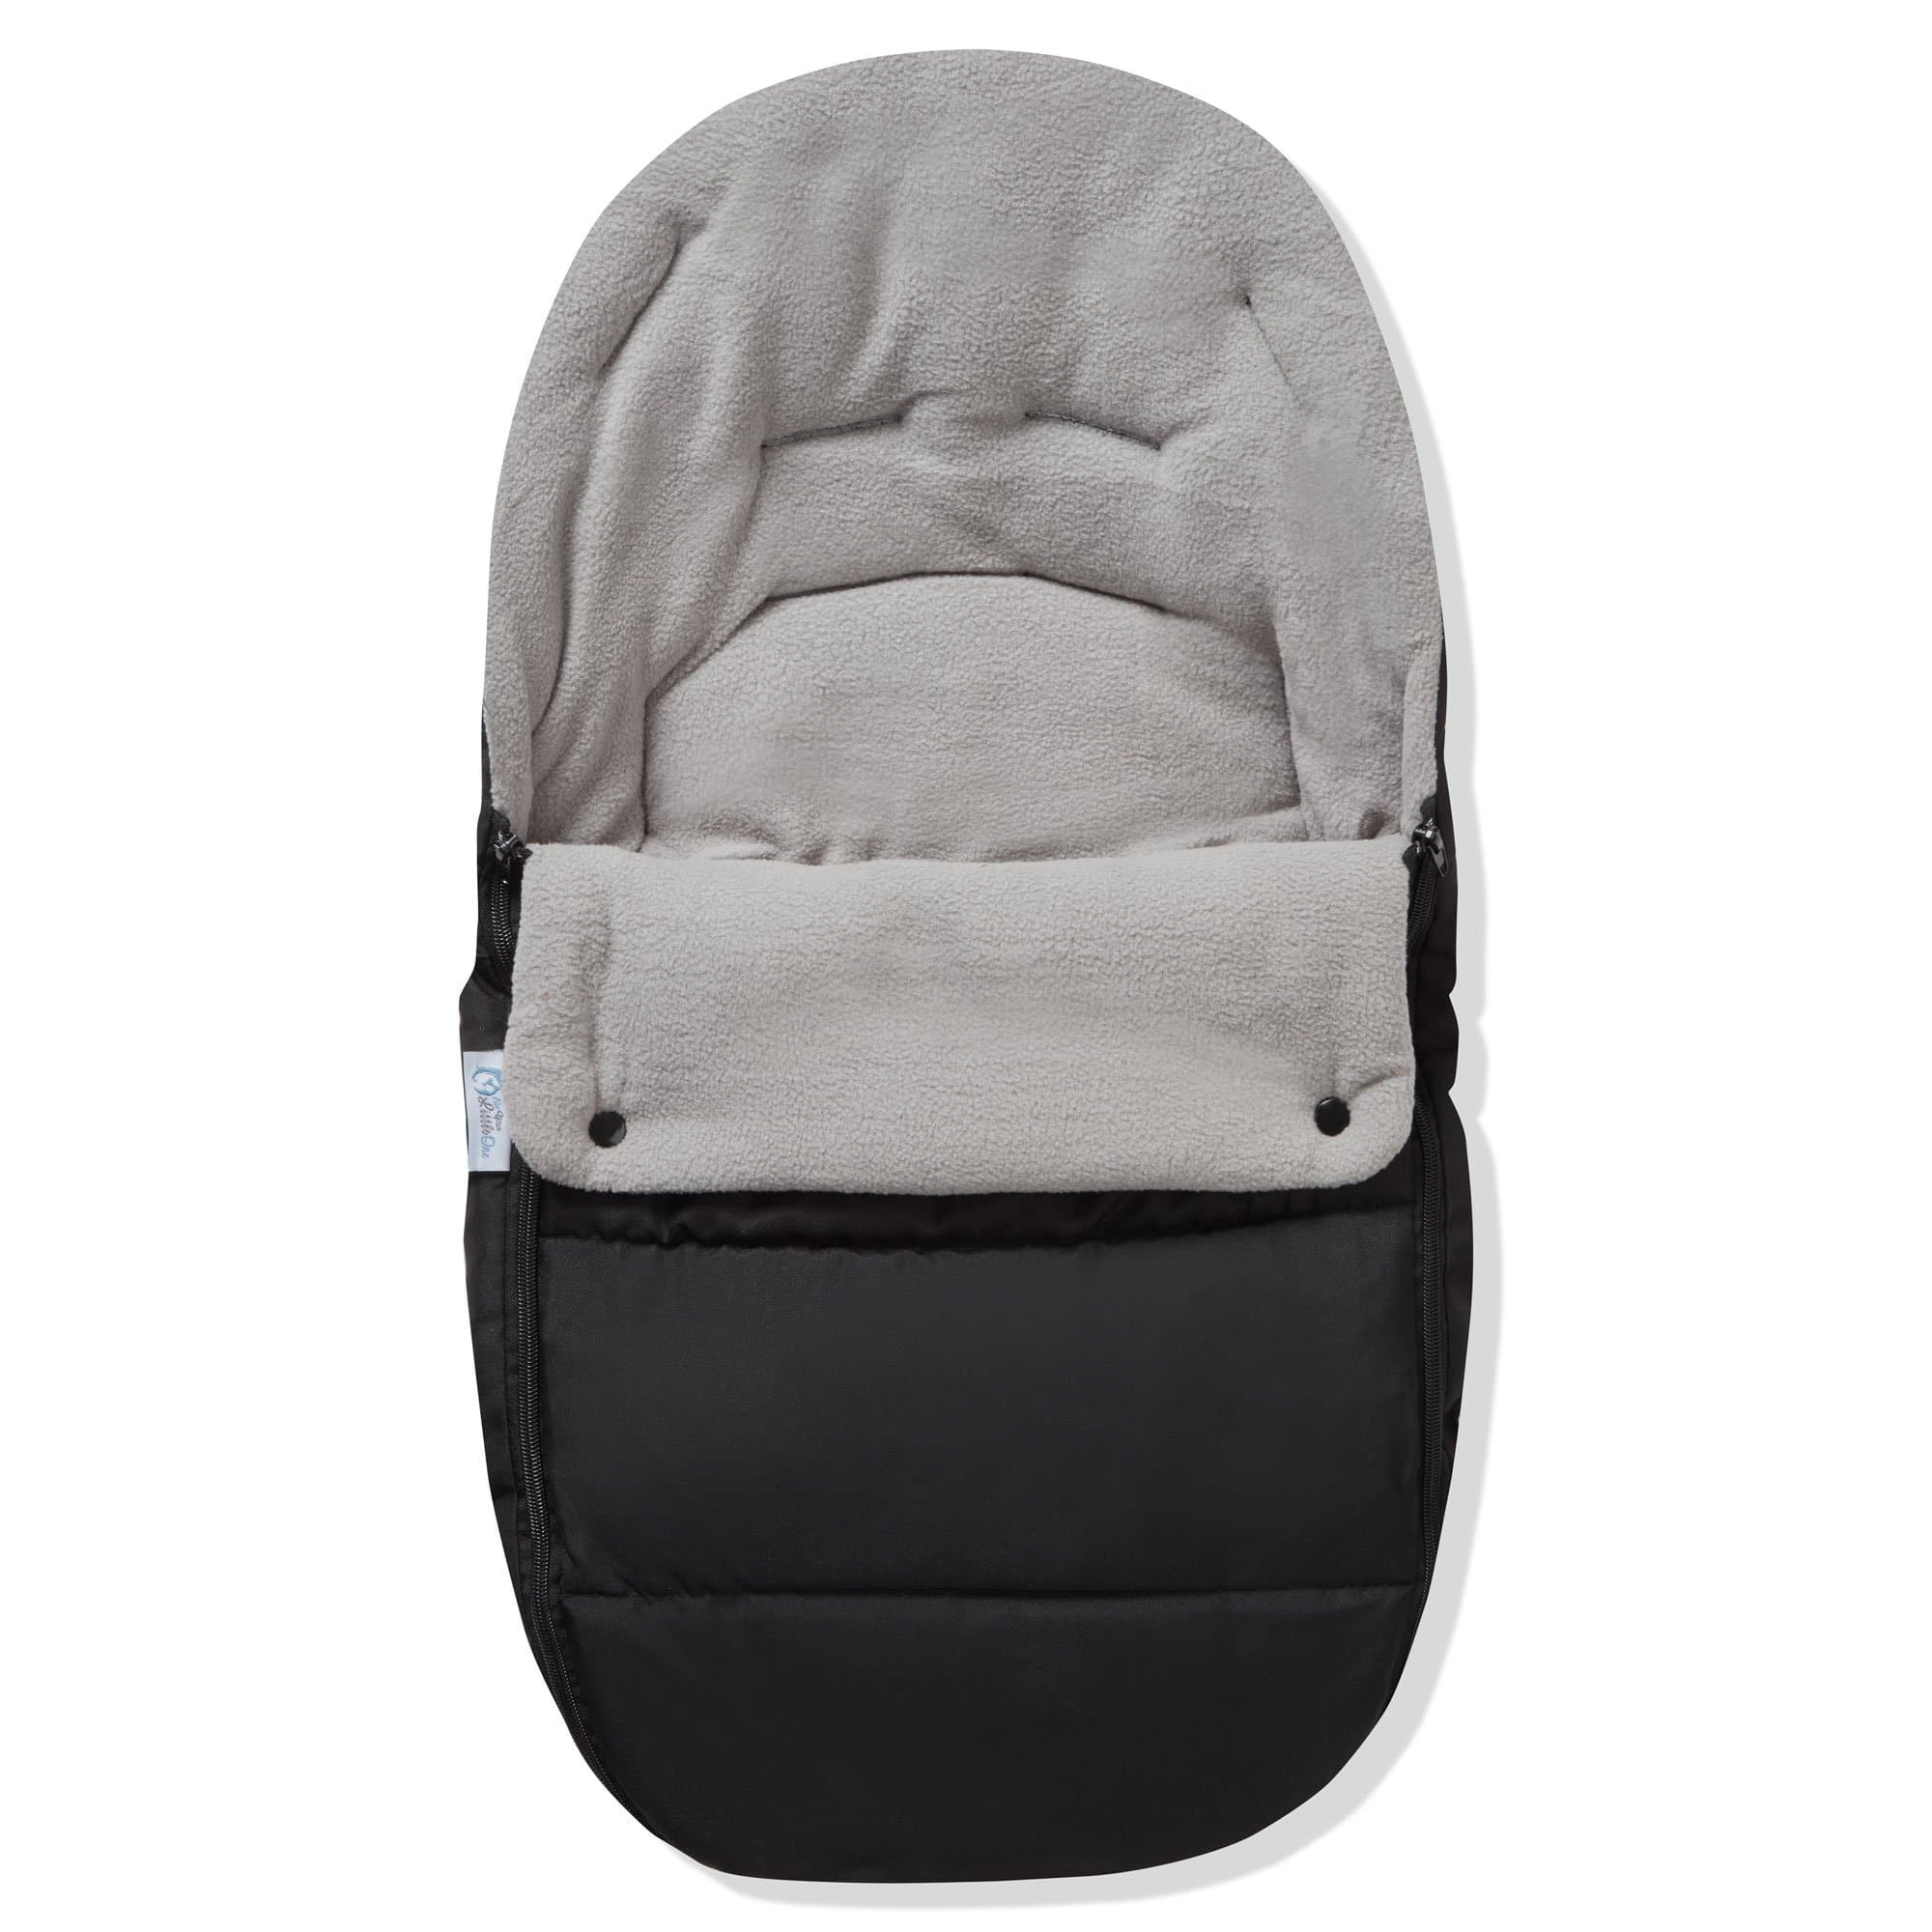 Premium Car Seat Footmuff / Cosy Toes Compatible with Cybex - Dolphin Grey / Fits All Models | For Your Little One